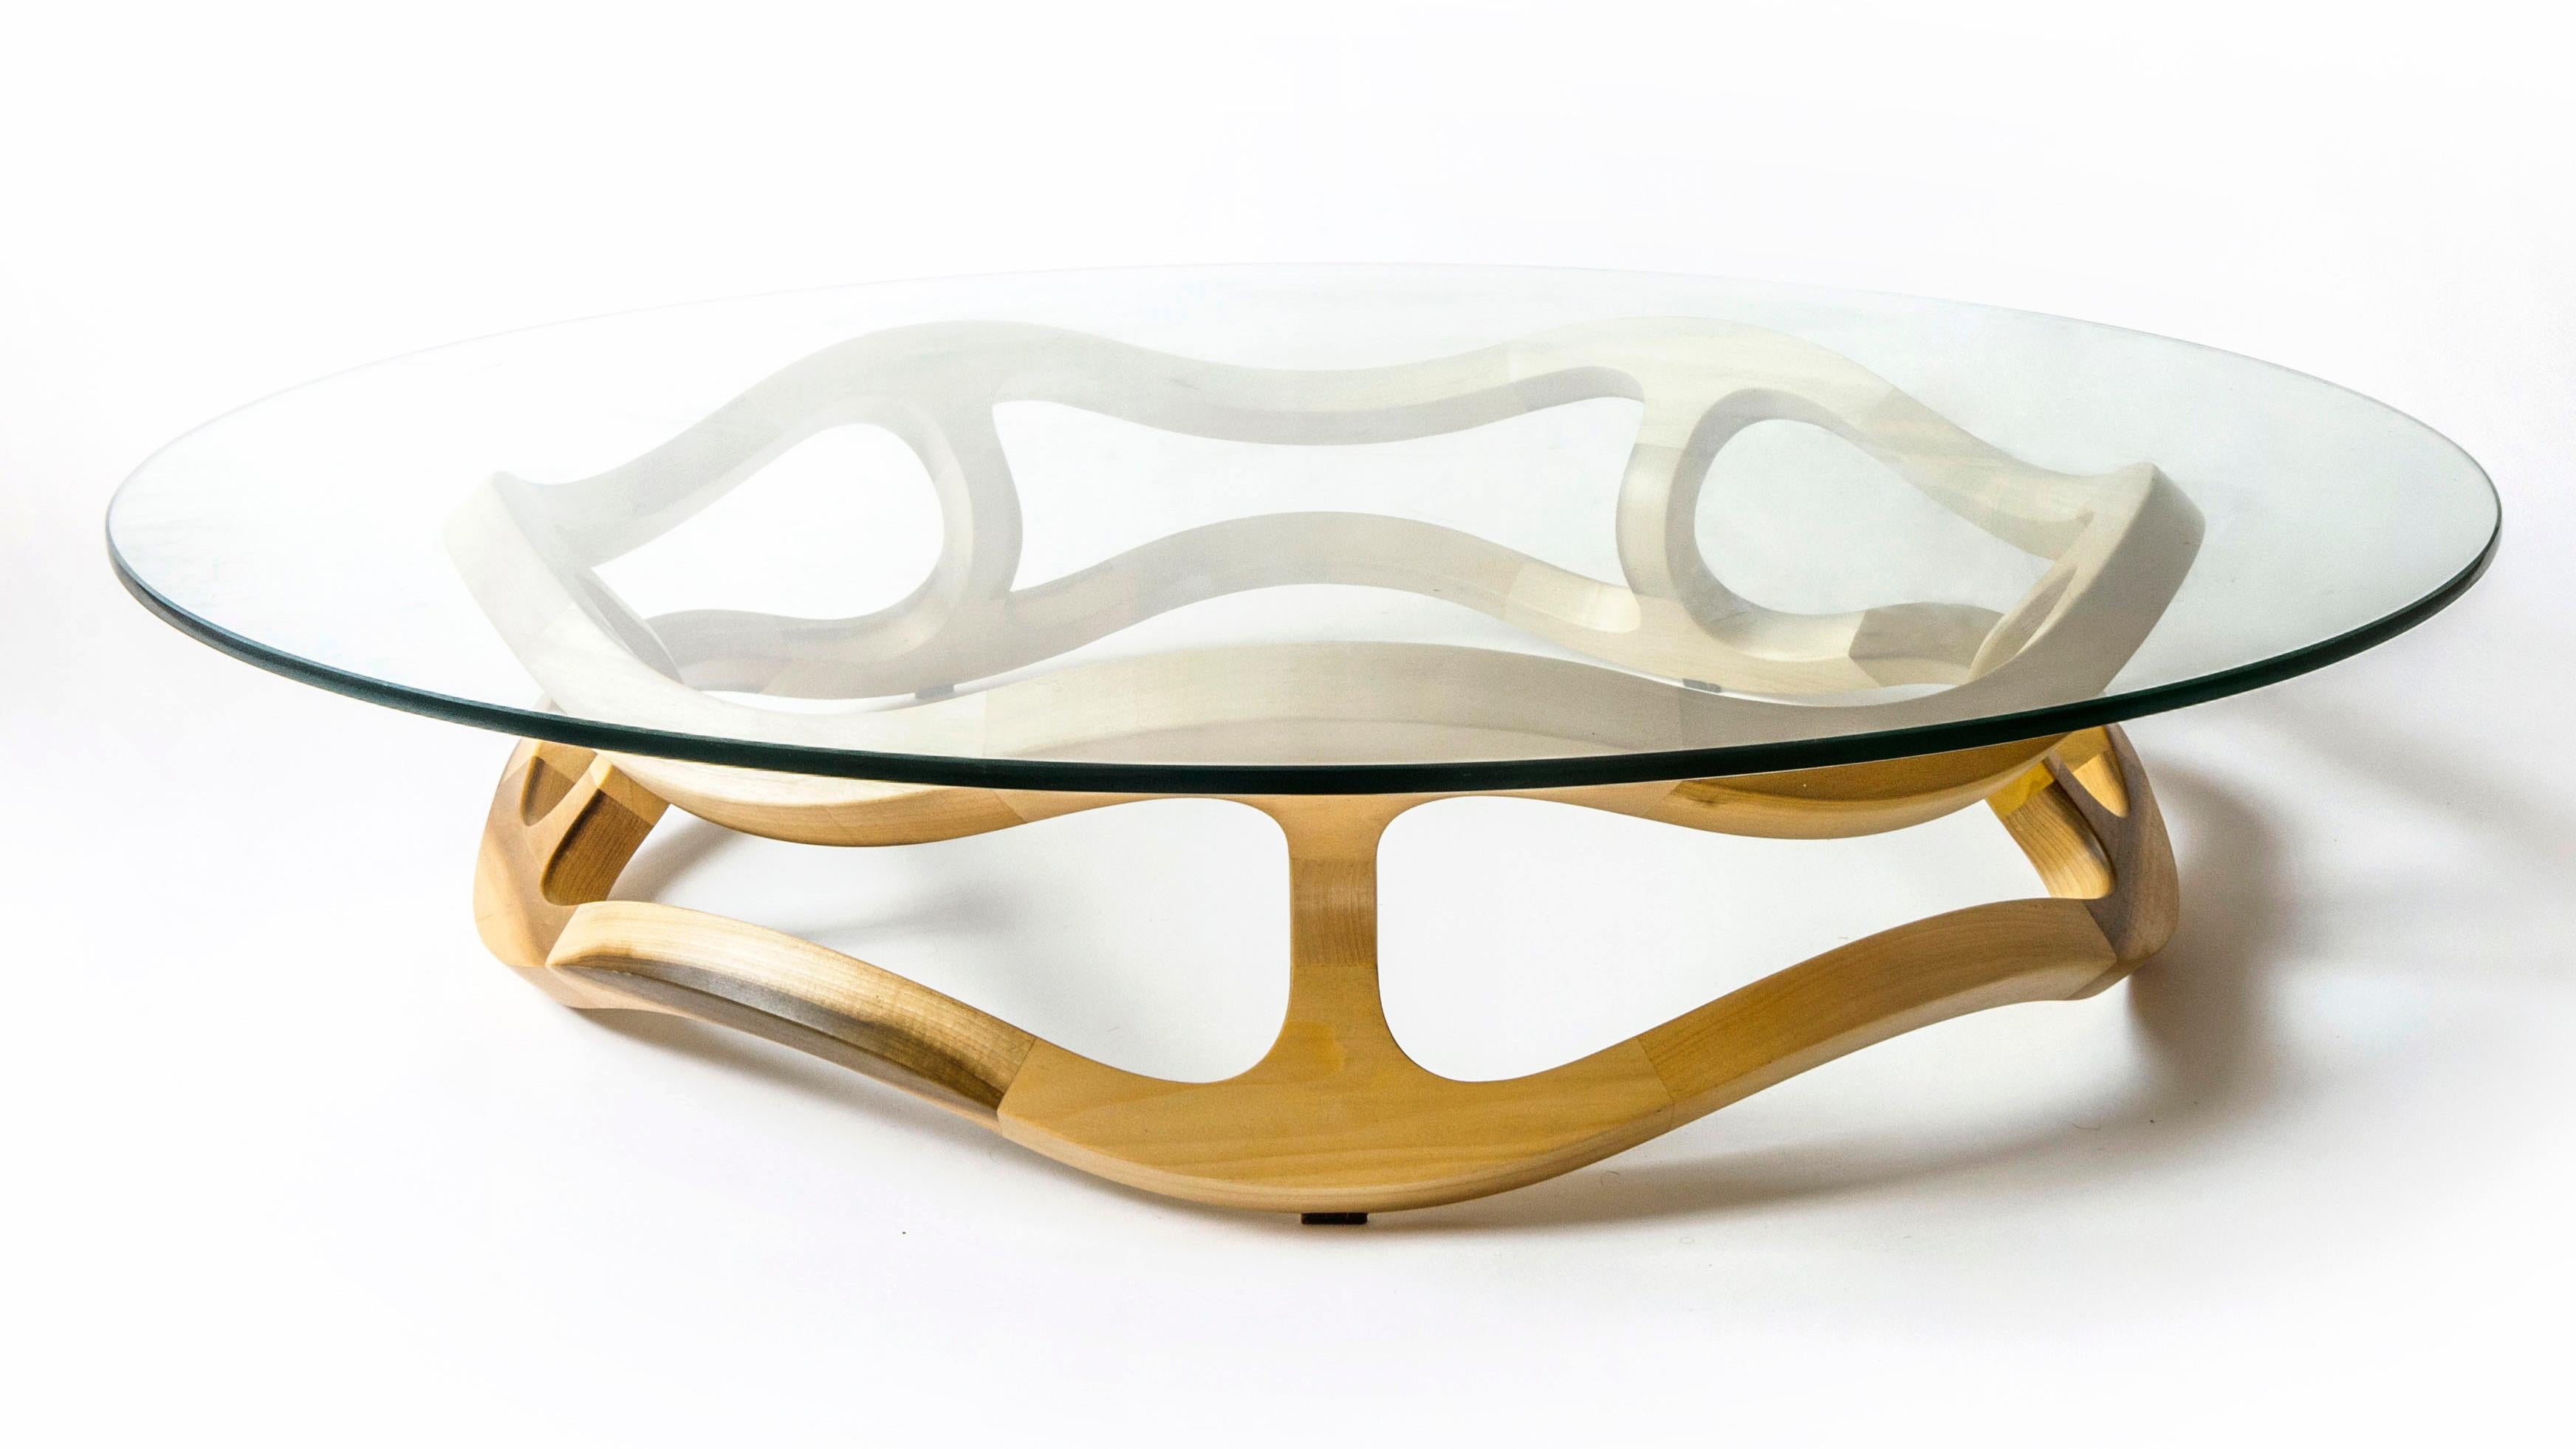 Flamenca, Geometric Sculptural Center Table Made of Solid Wood by Pedro Cerisola For Sale 1